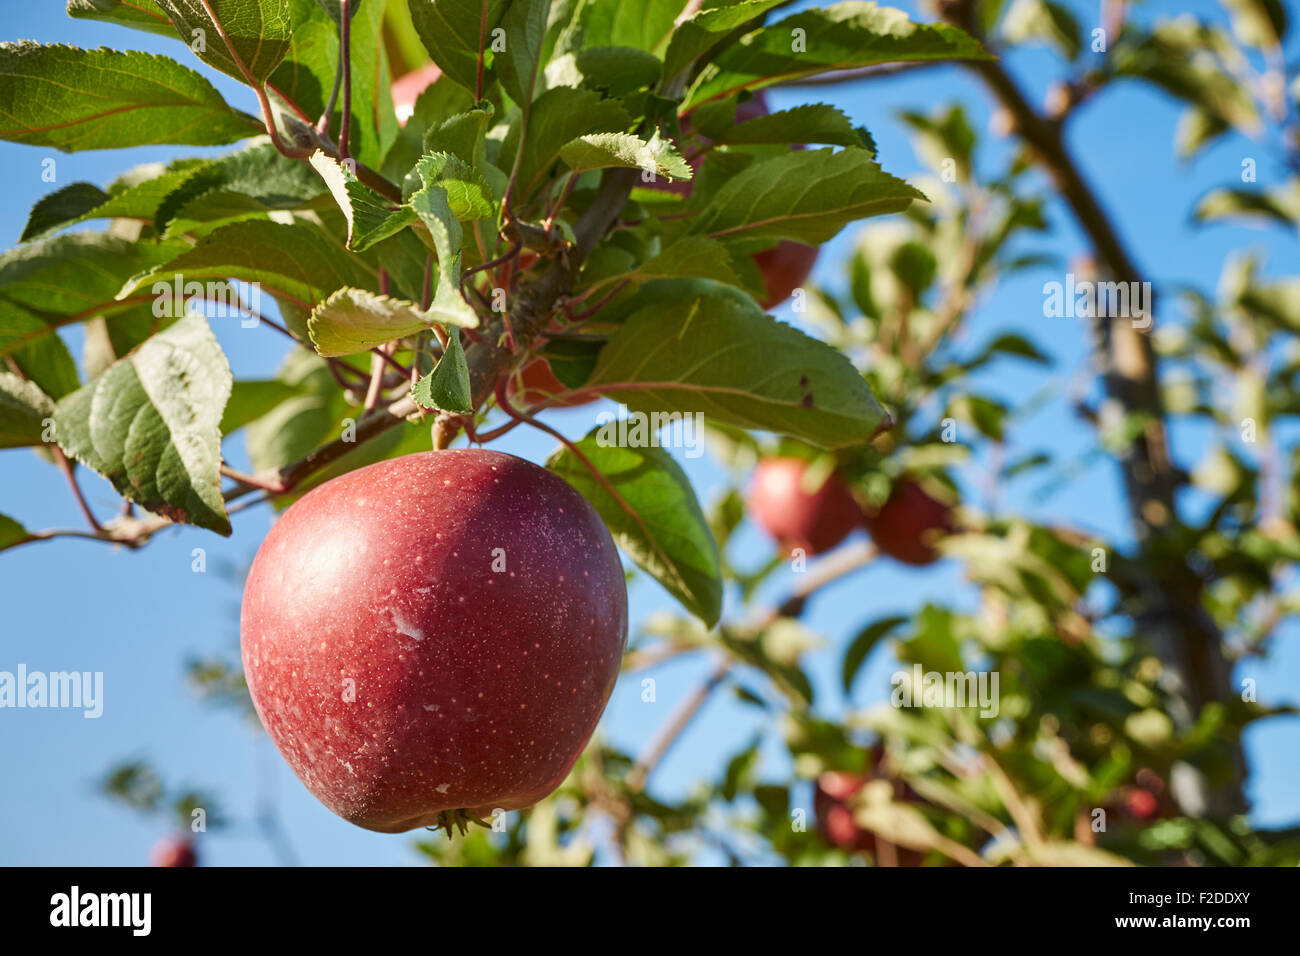 A ripe apple on a tree in a Pennsylvania orchard Stock Photo